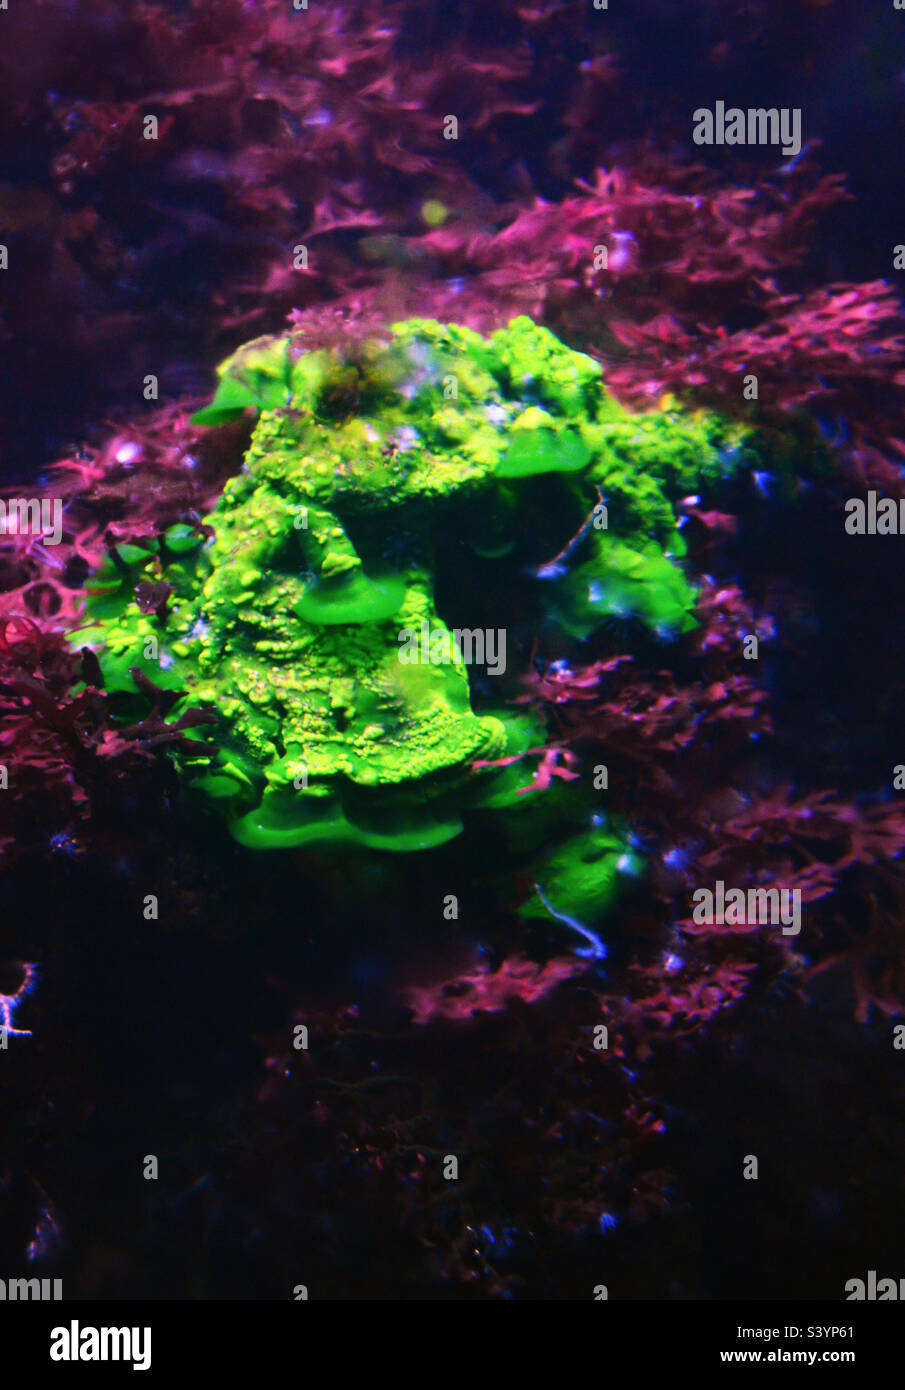 Green fluorescent coral growing on a rock covered in purple seaweeds. Stock Photo